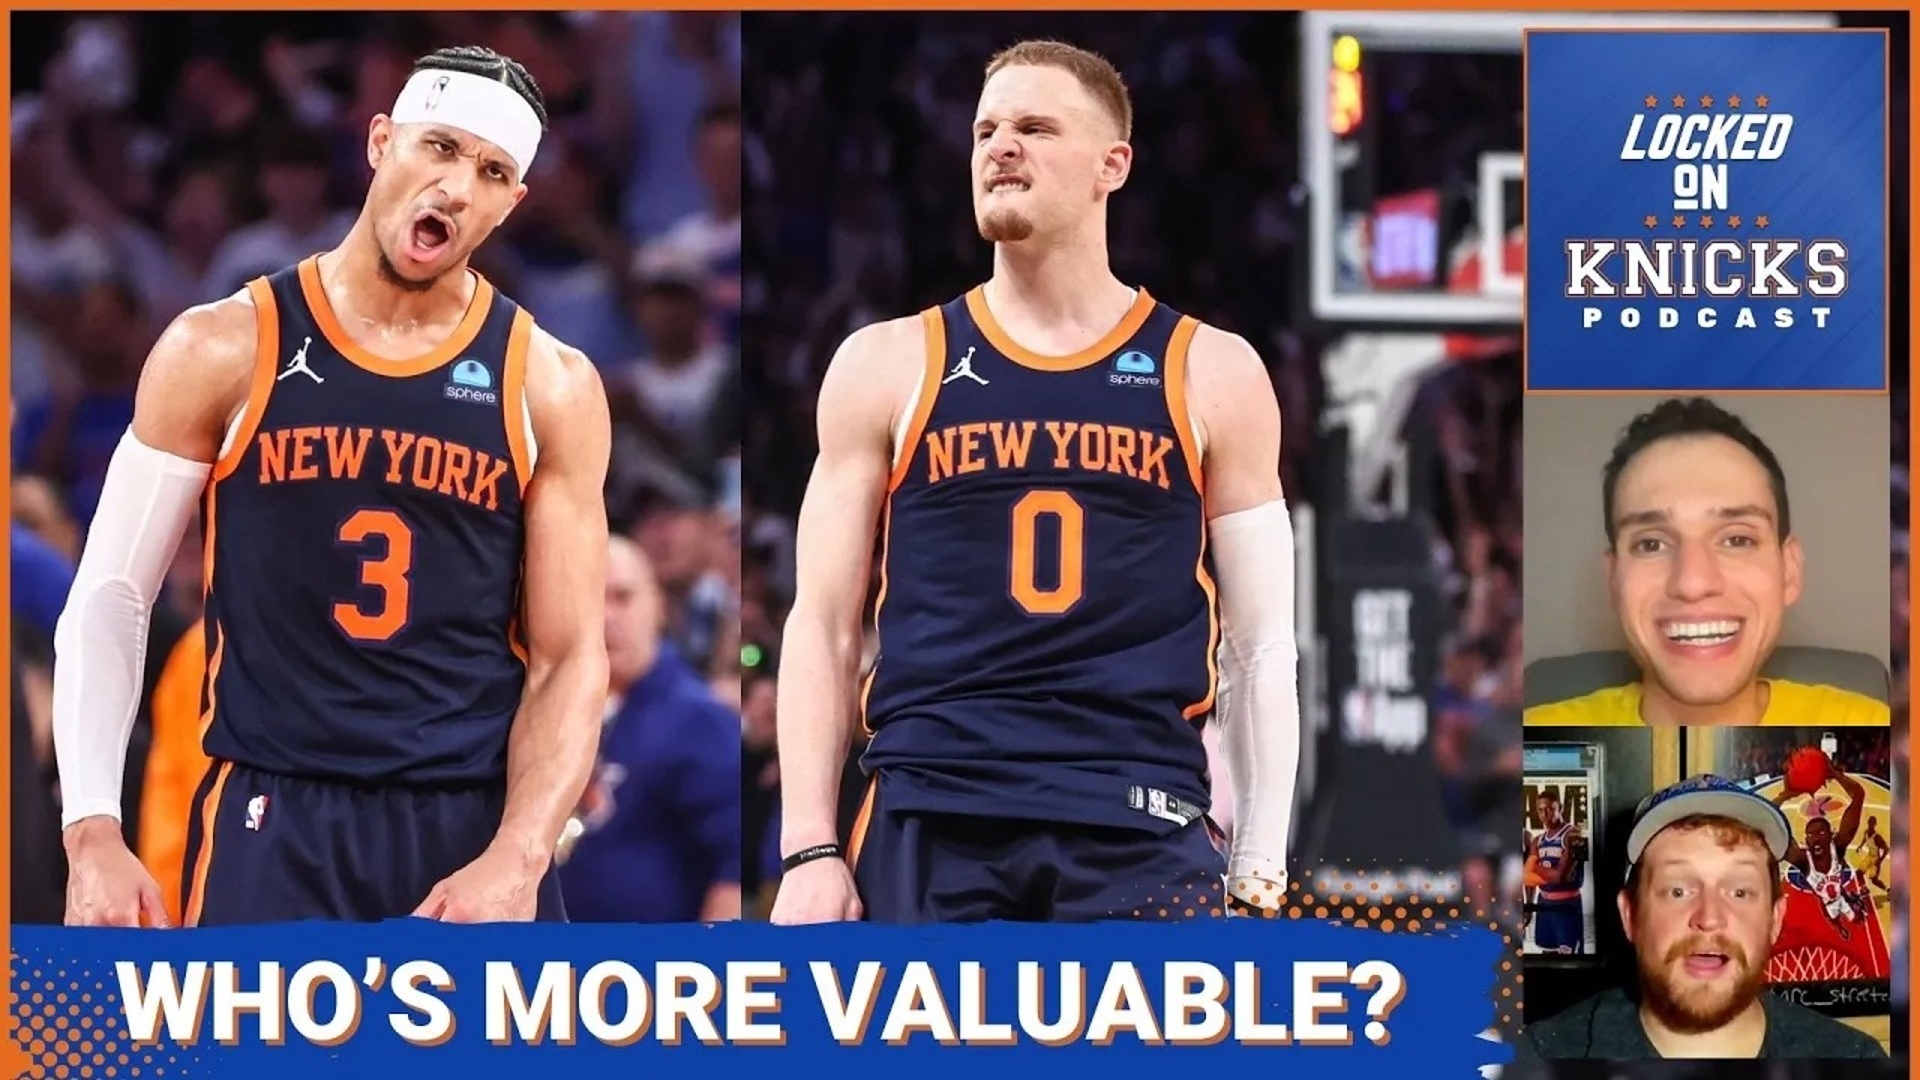 Gavin Schall and Alex Wolfe are back to continue breaking down the Knicks asset rankings!